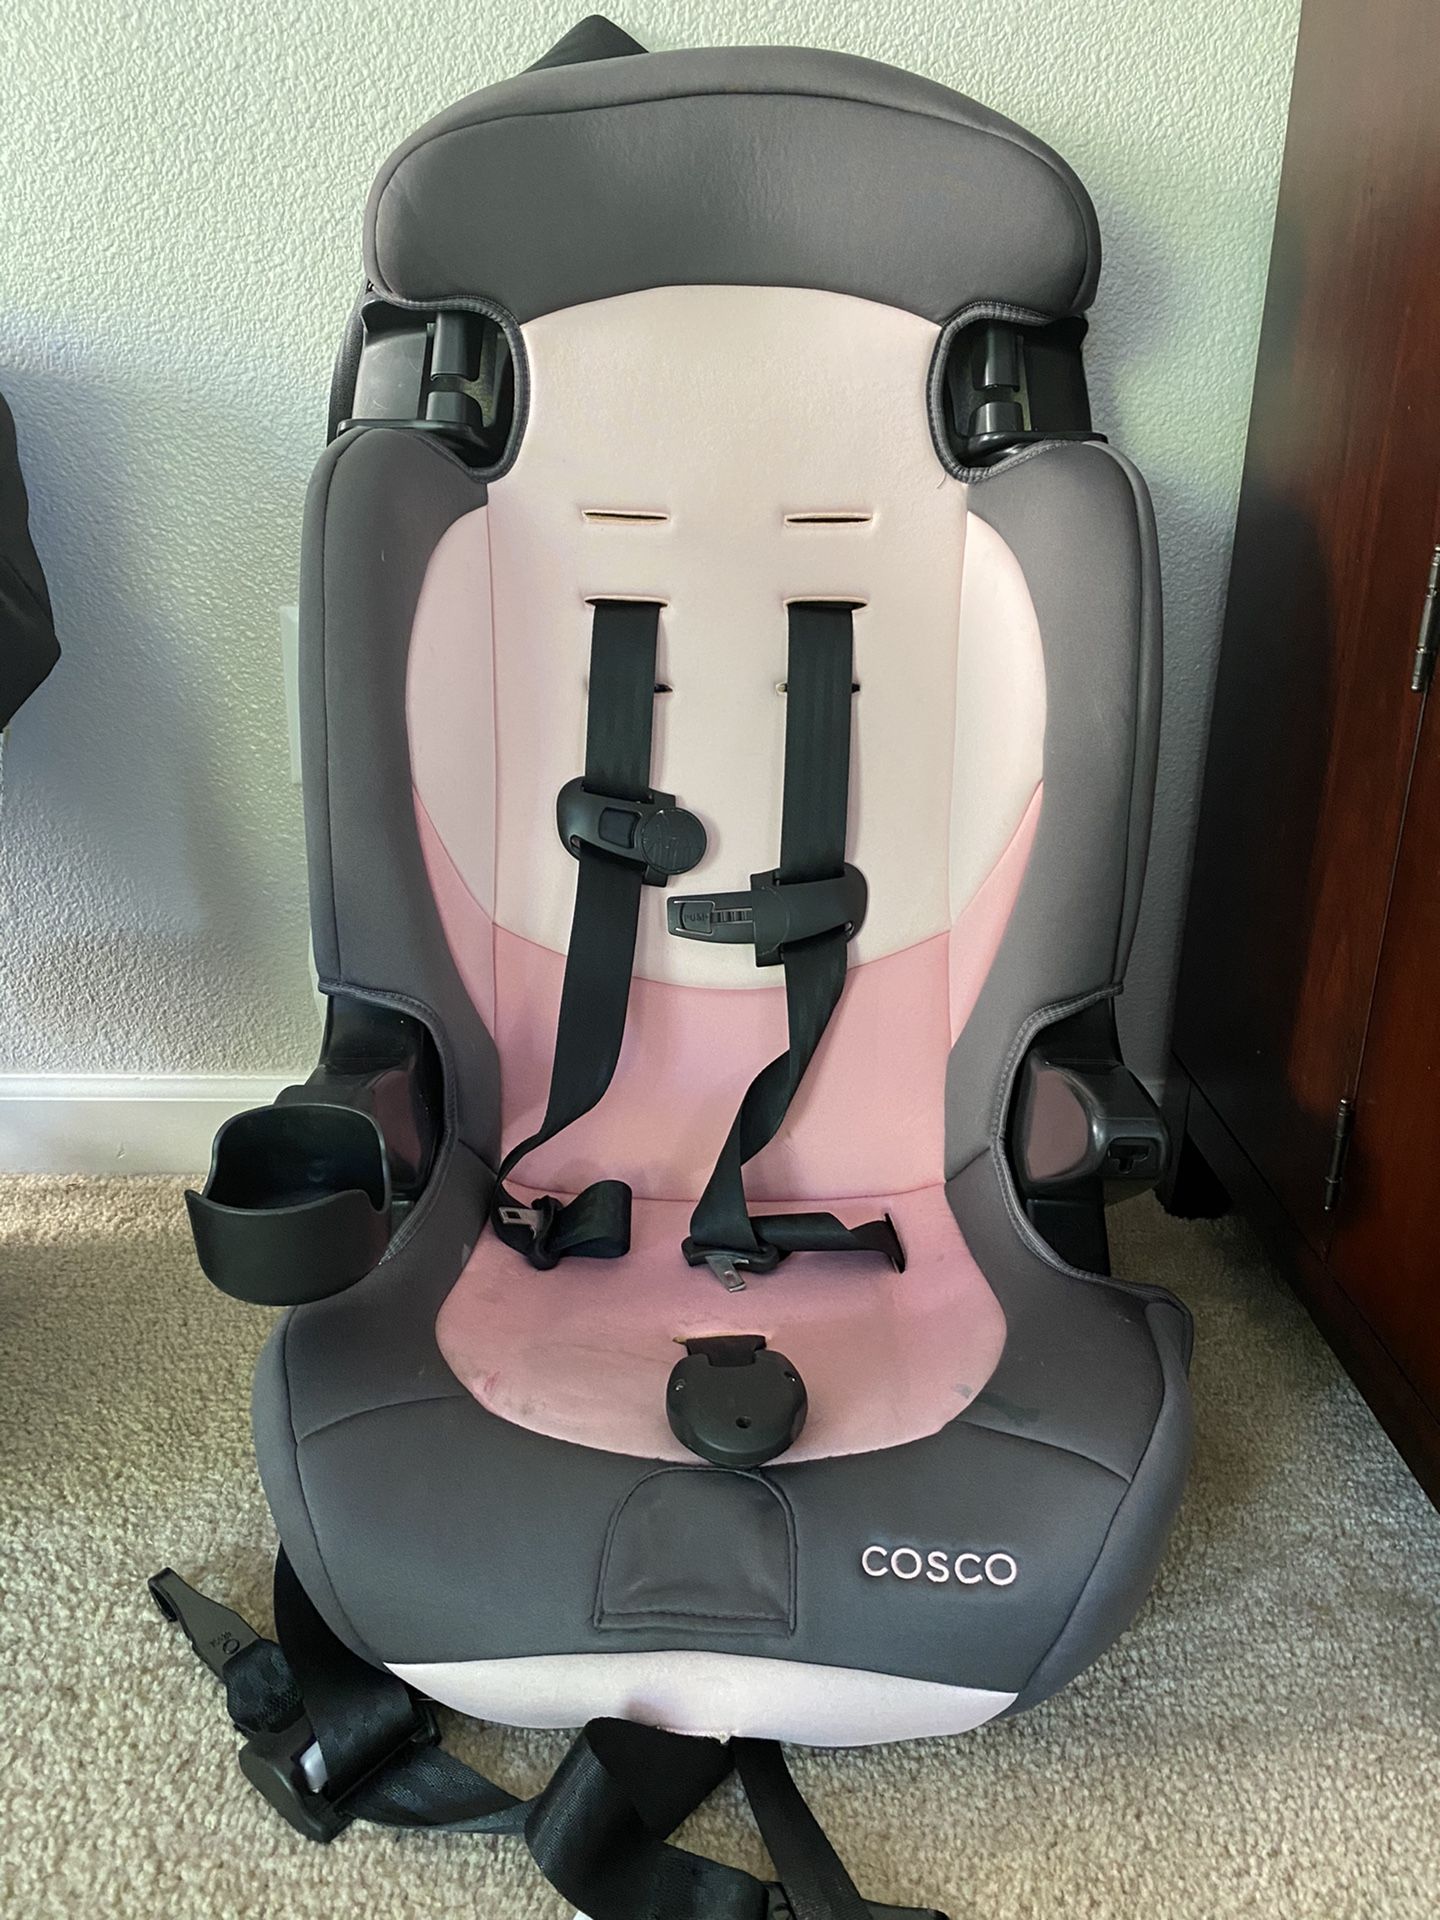 Cosco Finale DX 2-in-1 booster car seat